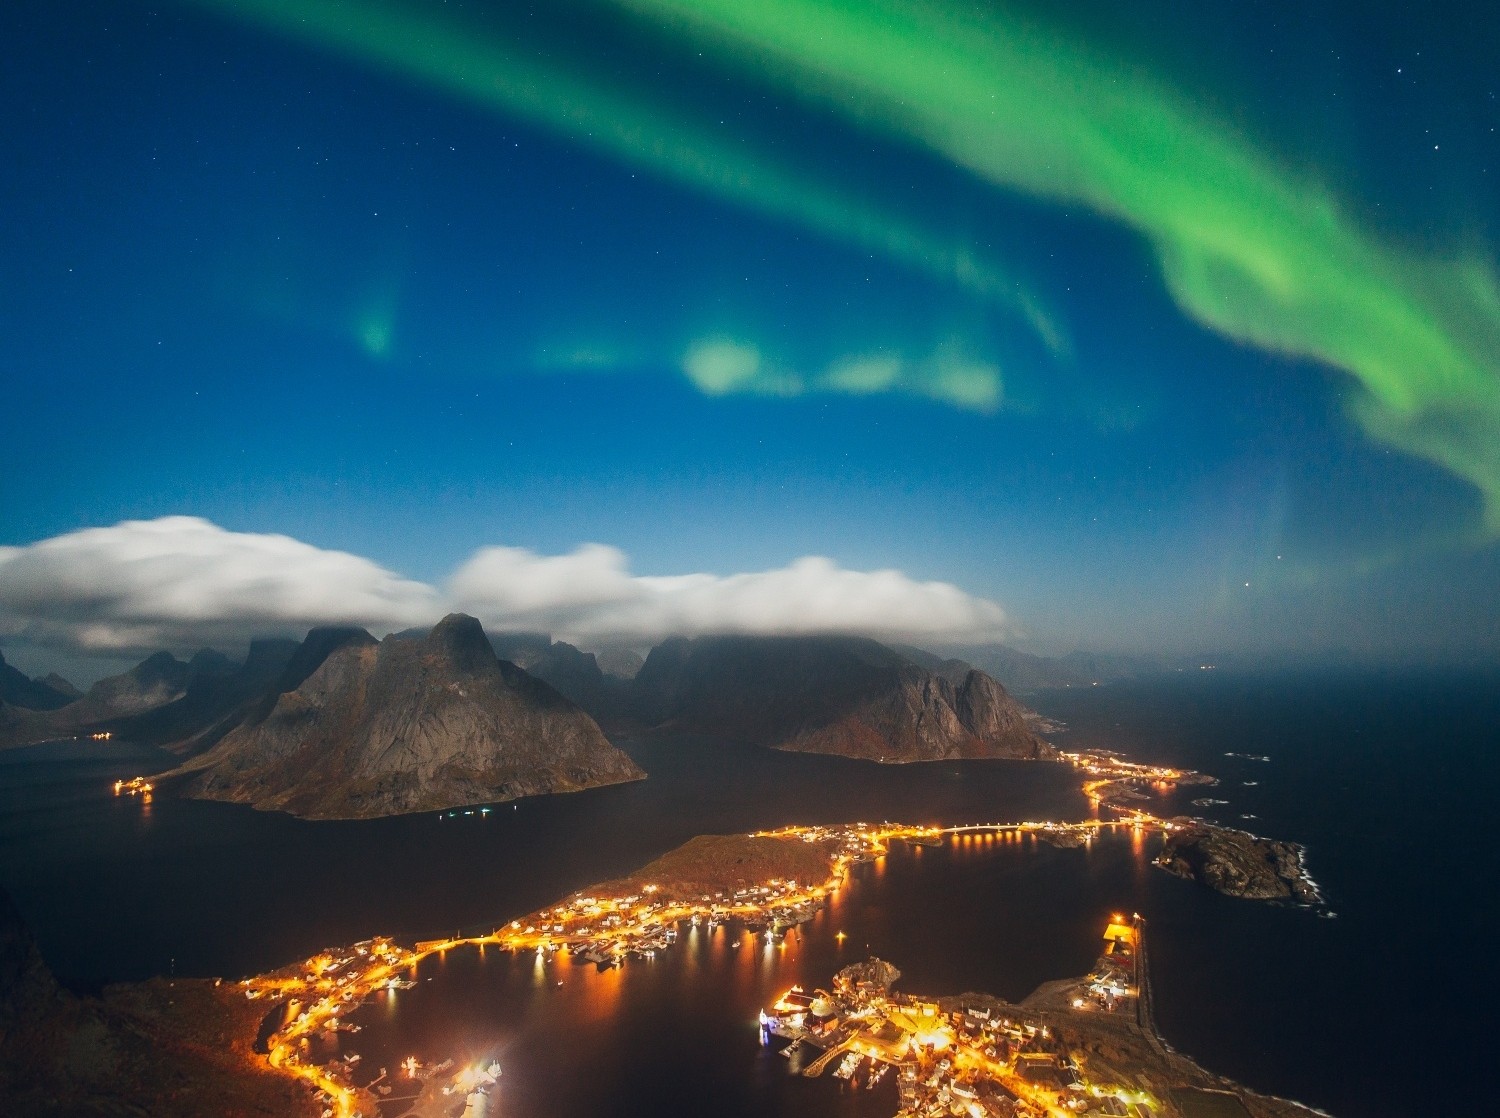 General 1500x1118 nature photography landscape sea mountains town lights starry night Lofoten Norway aurorae nordic landscapes sky